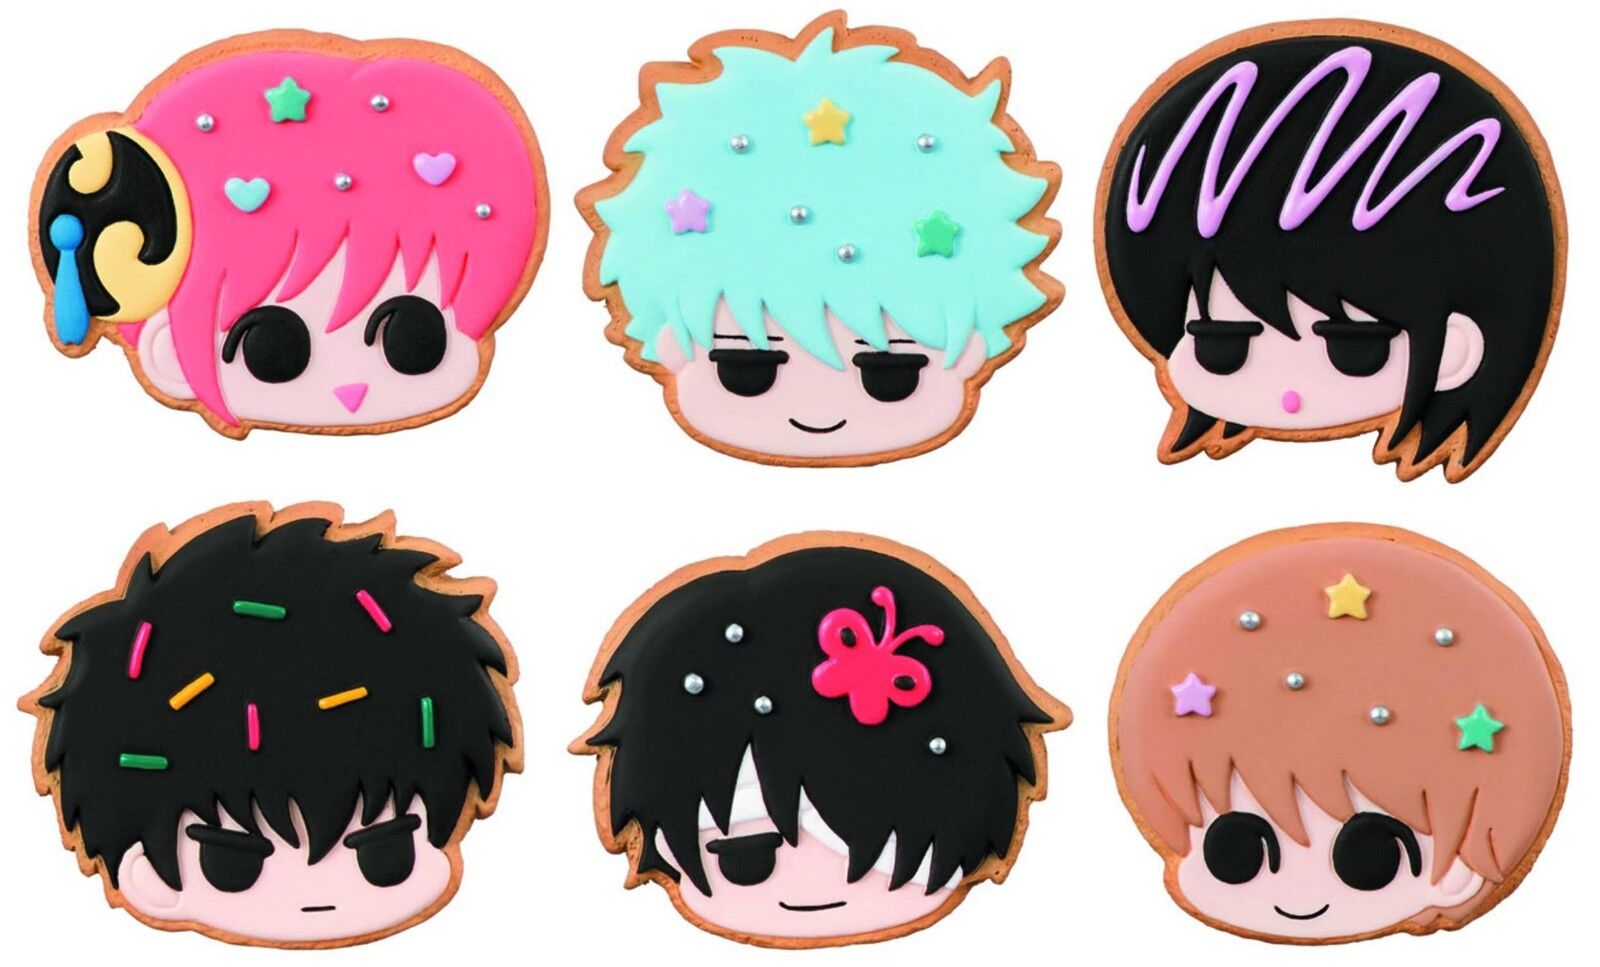 GINTAMA PATISSERIE COOKIE SHOP CHARM 6 PCS DISPLAY MEGAHOUSE NEW